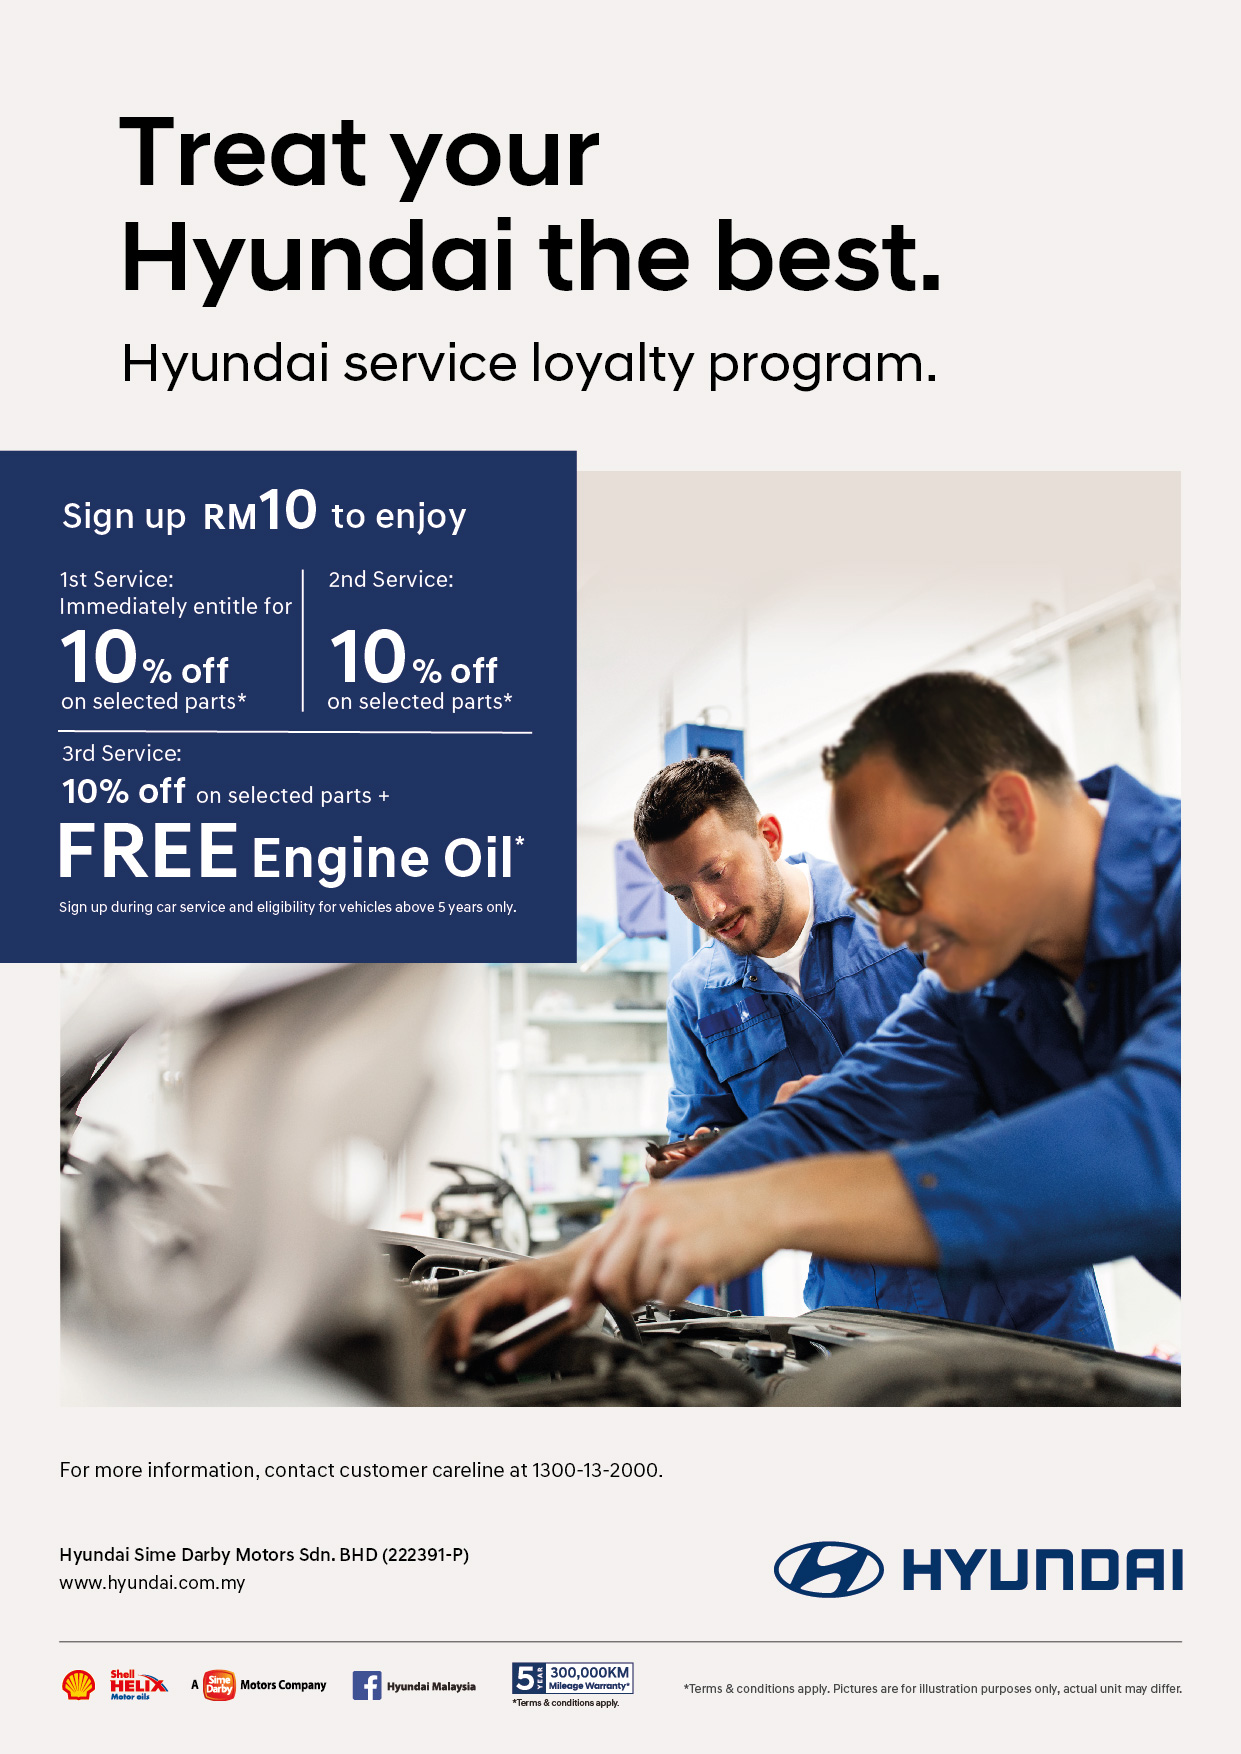 Treat your Hyundai the best. Hyundai service loyalty program. Sign up RM10 to enjoy 1st Service : immediately entitle for 10% off on selected parts*. 2nd Service : 10% off on selected parts*. 3rd Service : 10% off on selected parts + FREE engine oil*. Sign up during car service and eligiblity for vehicles above 5 years only. | For more information, contact customer careline at 1300-13-2000. Terms apply.